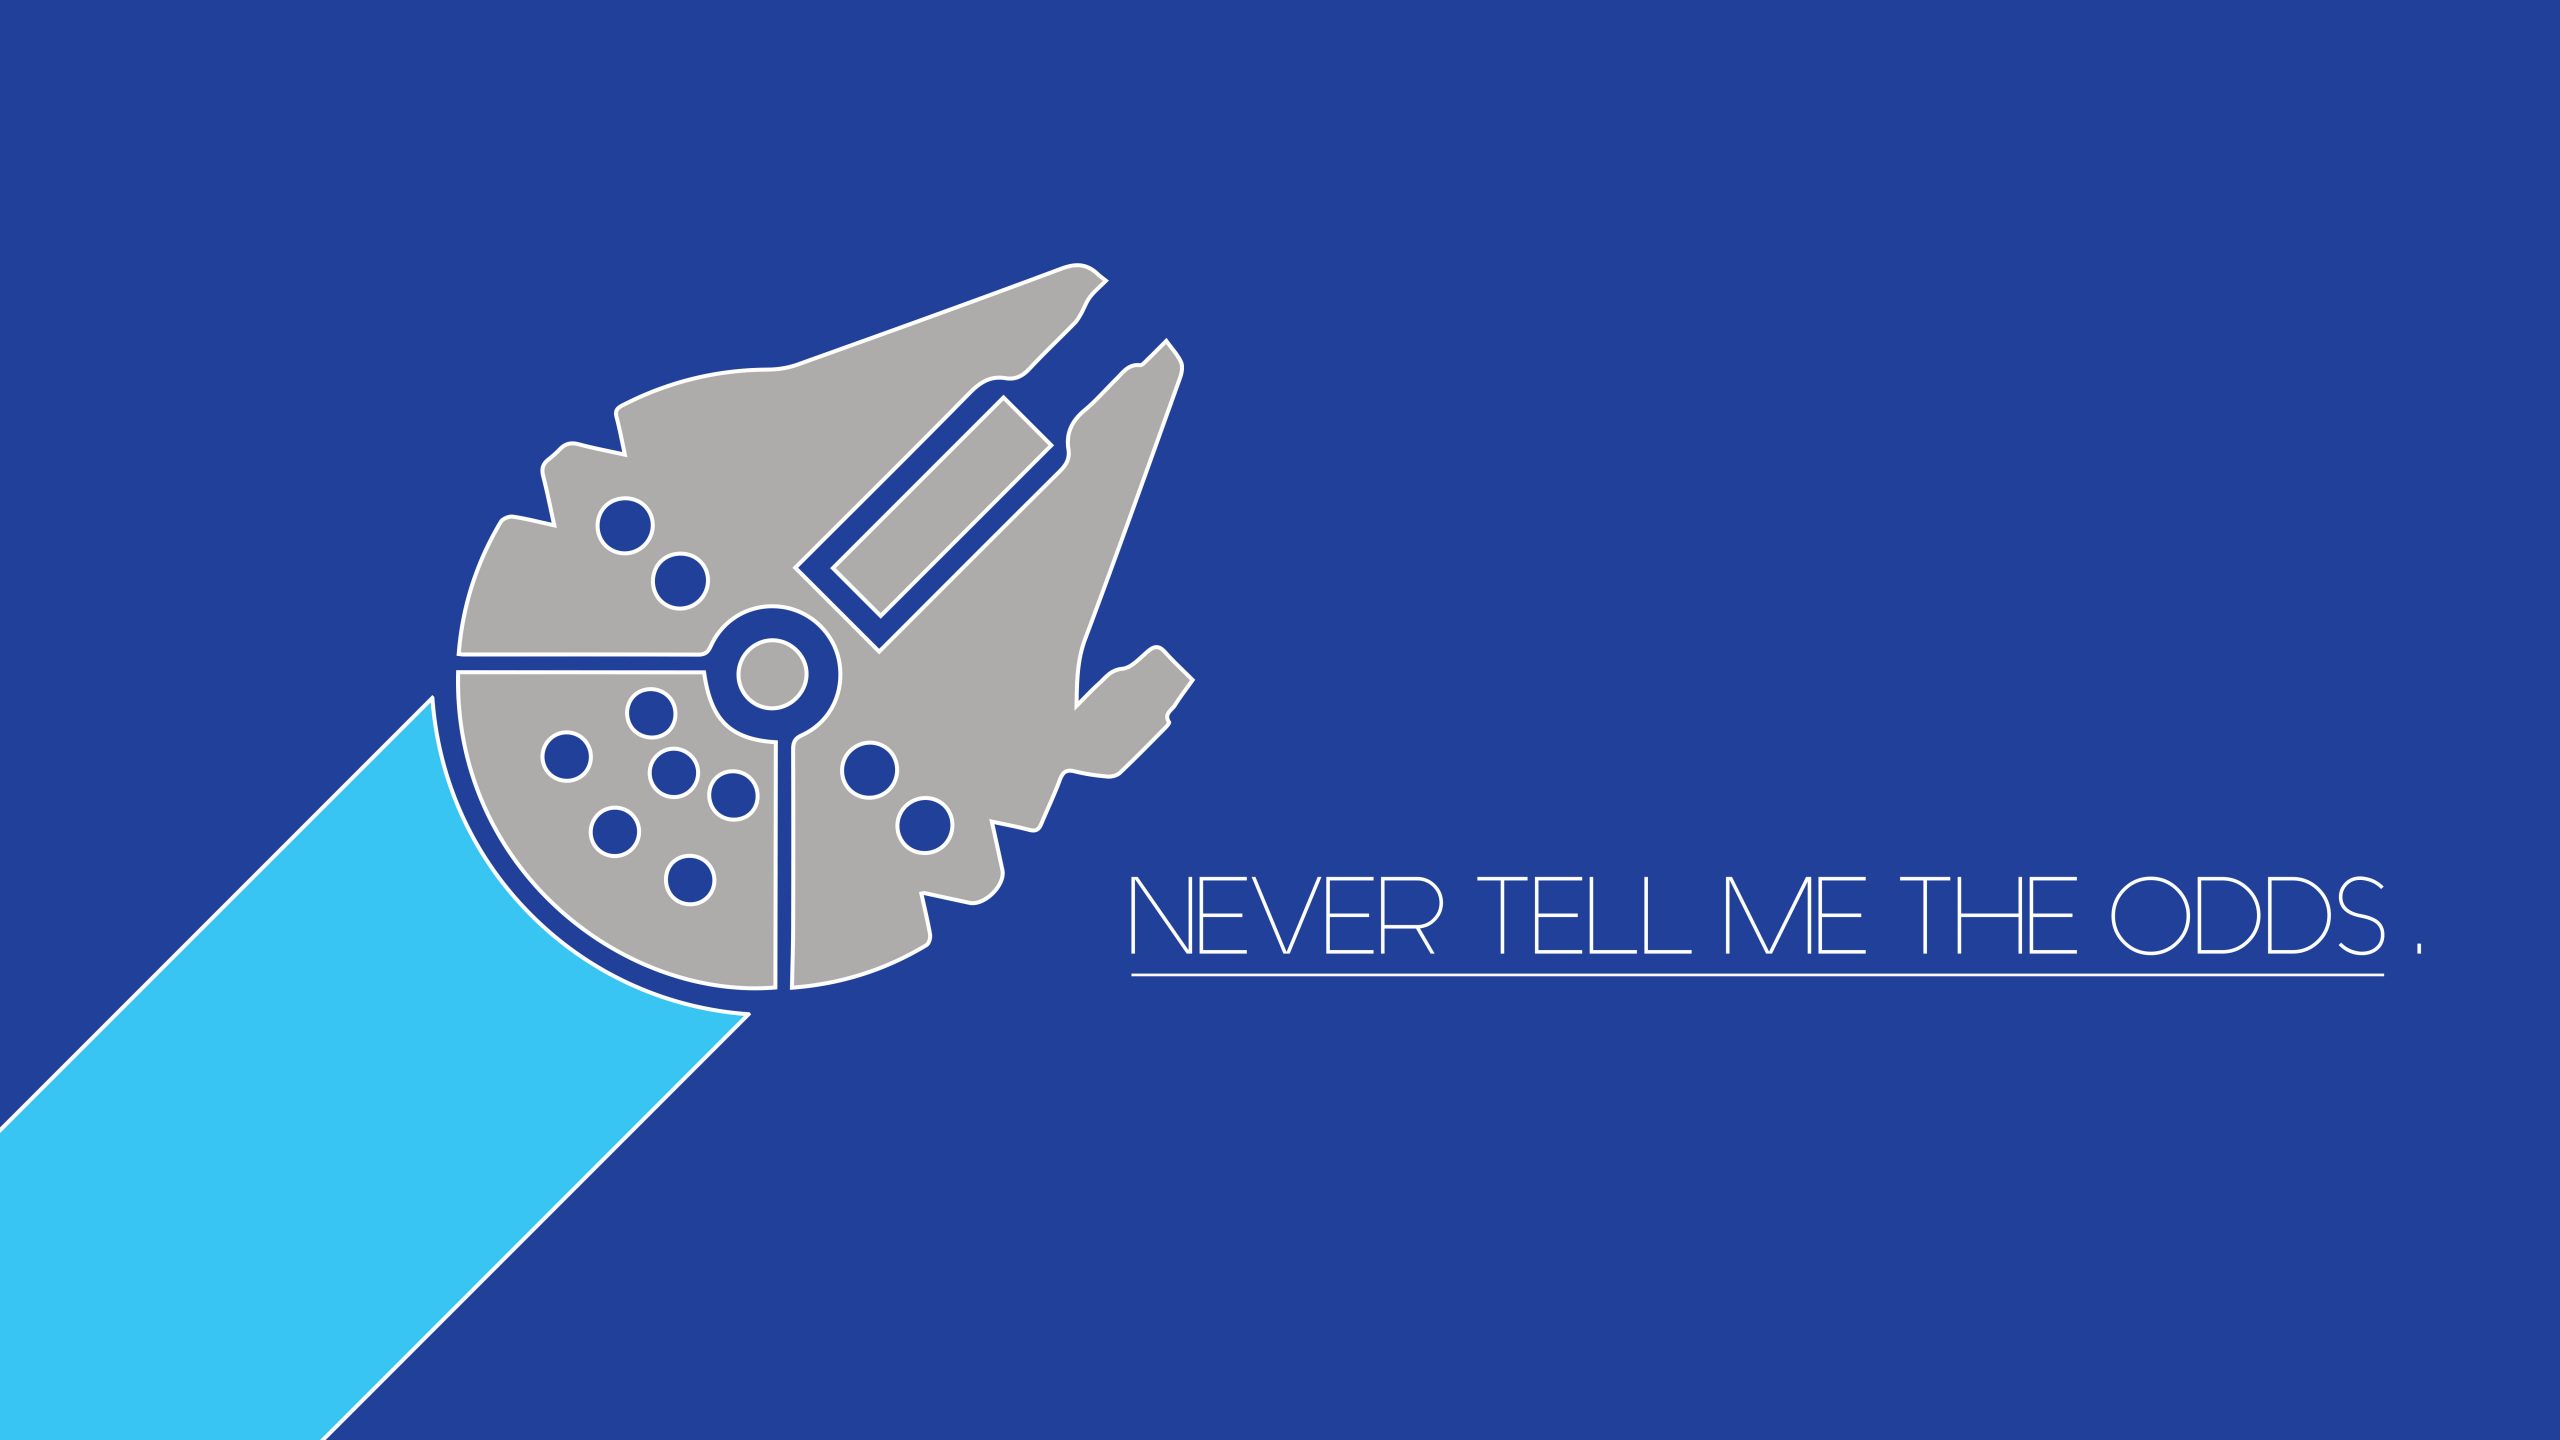 Never tell me the odds wallpaper, Star Wars, Millennium Falcon